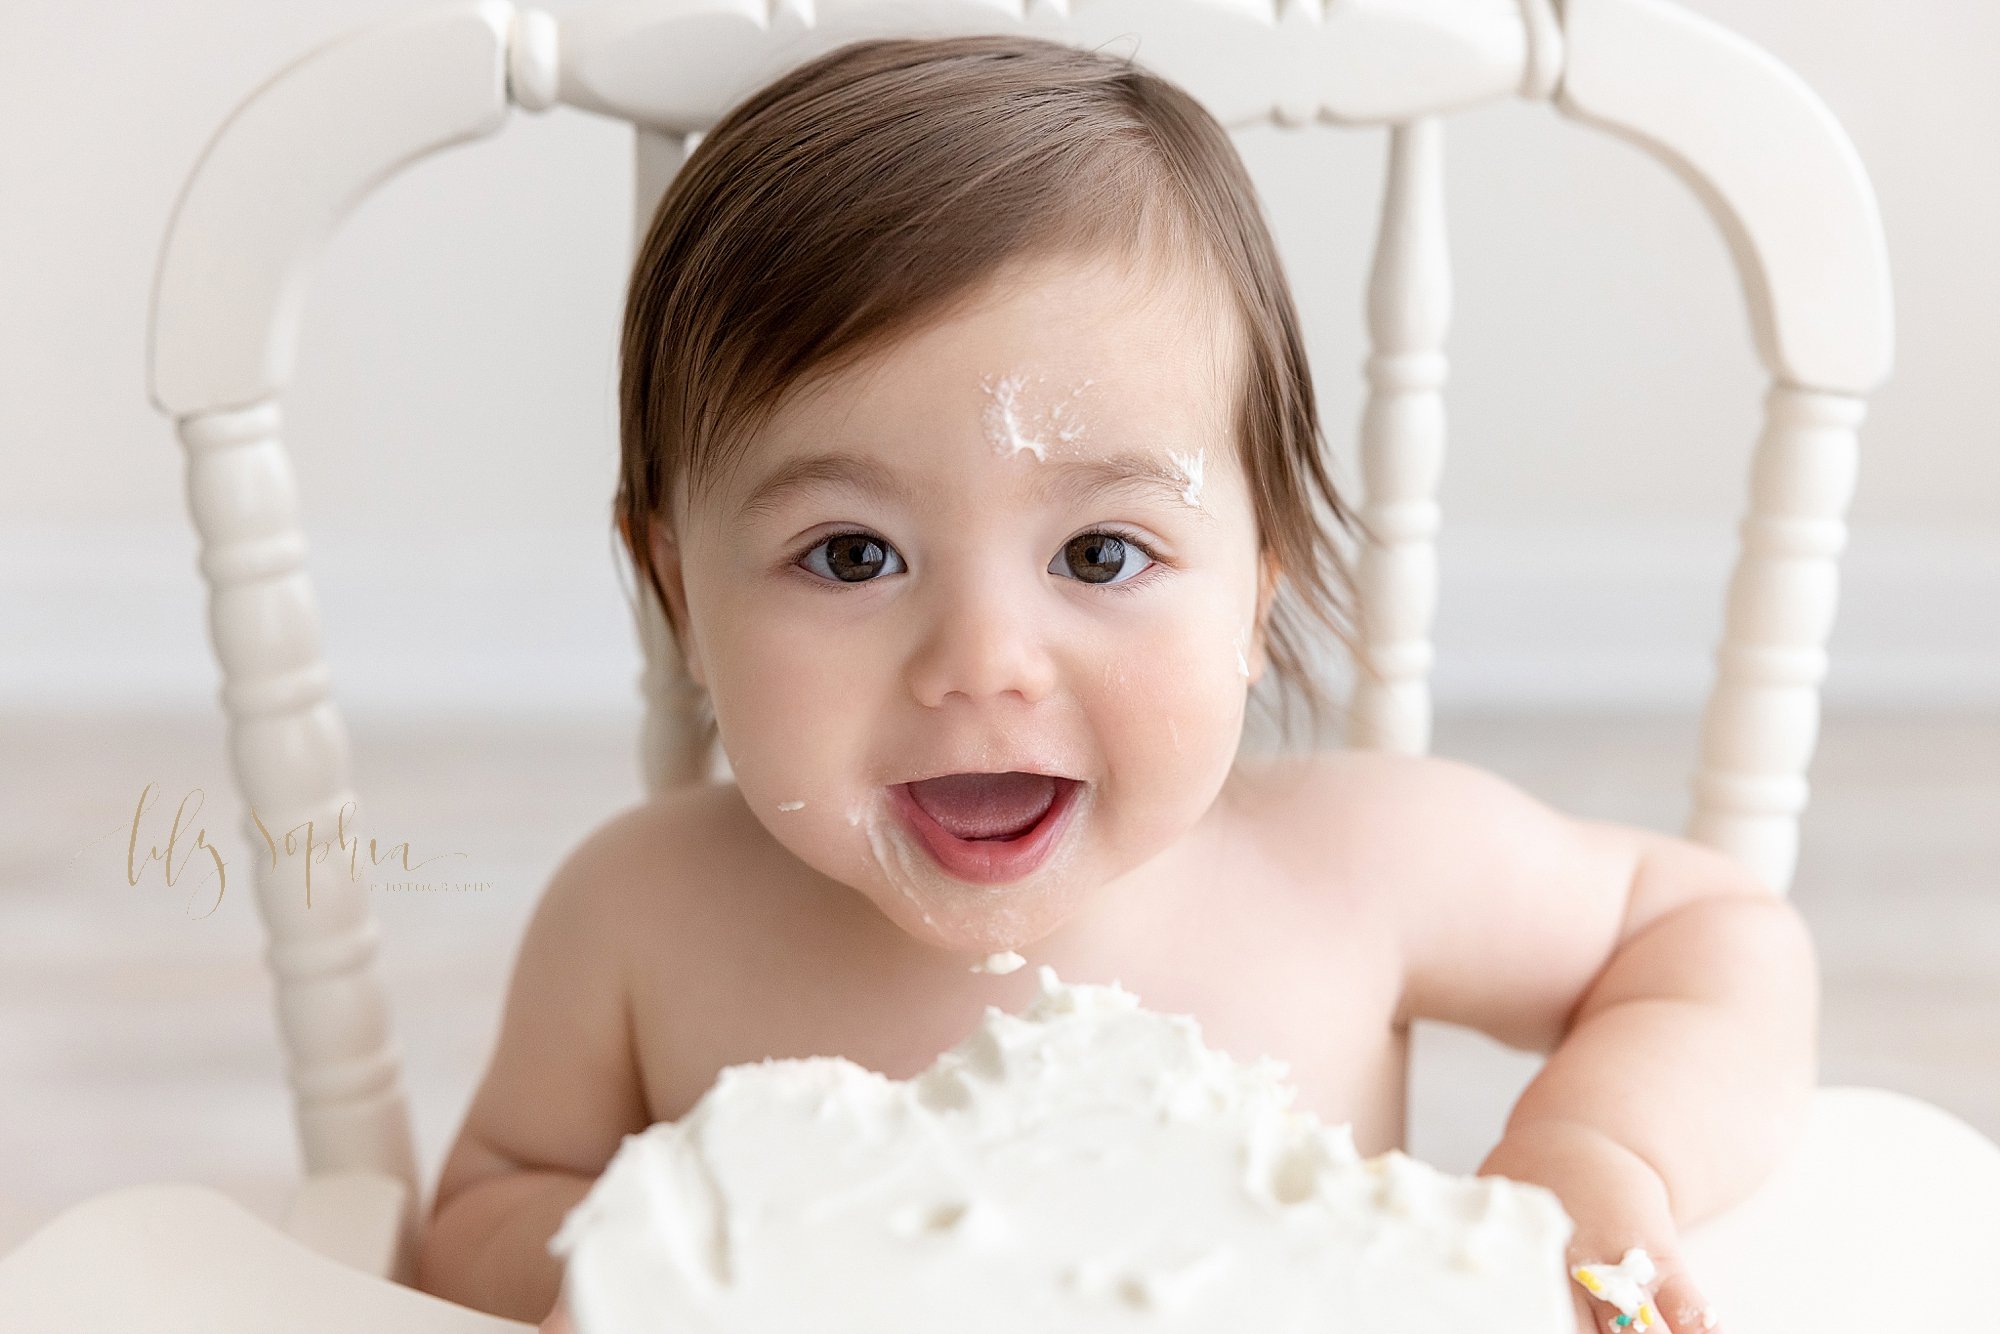  First birthday smash cake photo session of a one year old boy with icing on his face as he sits in an antique high chair with his smash cake on the tray taken using natural light in a photography studio near Morningside in Atlanta. 